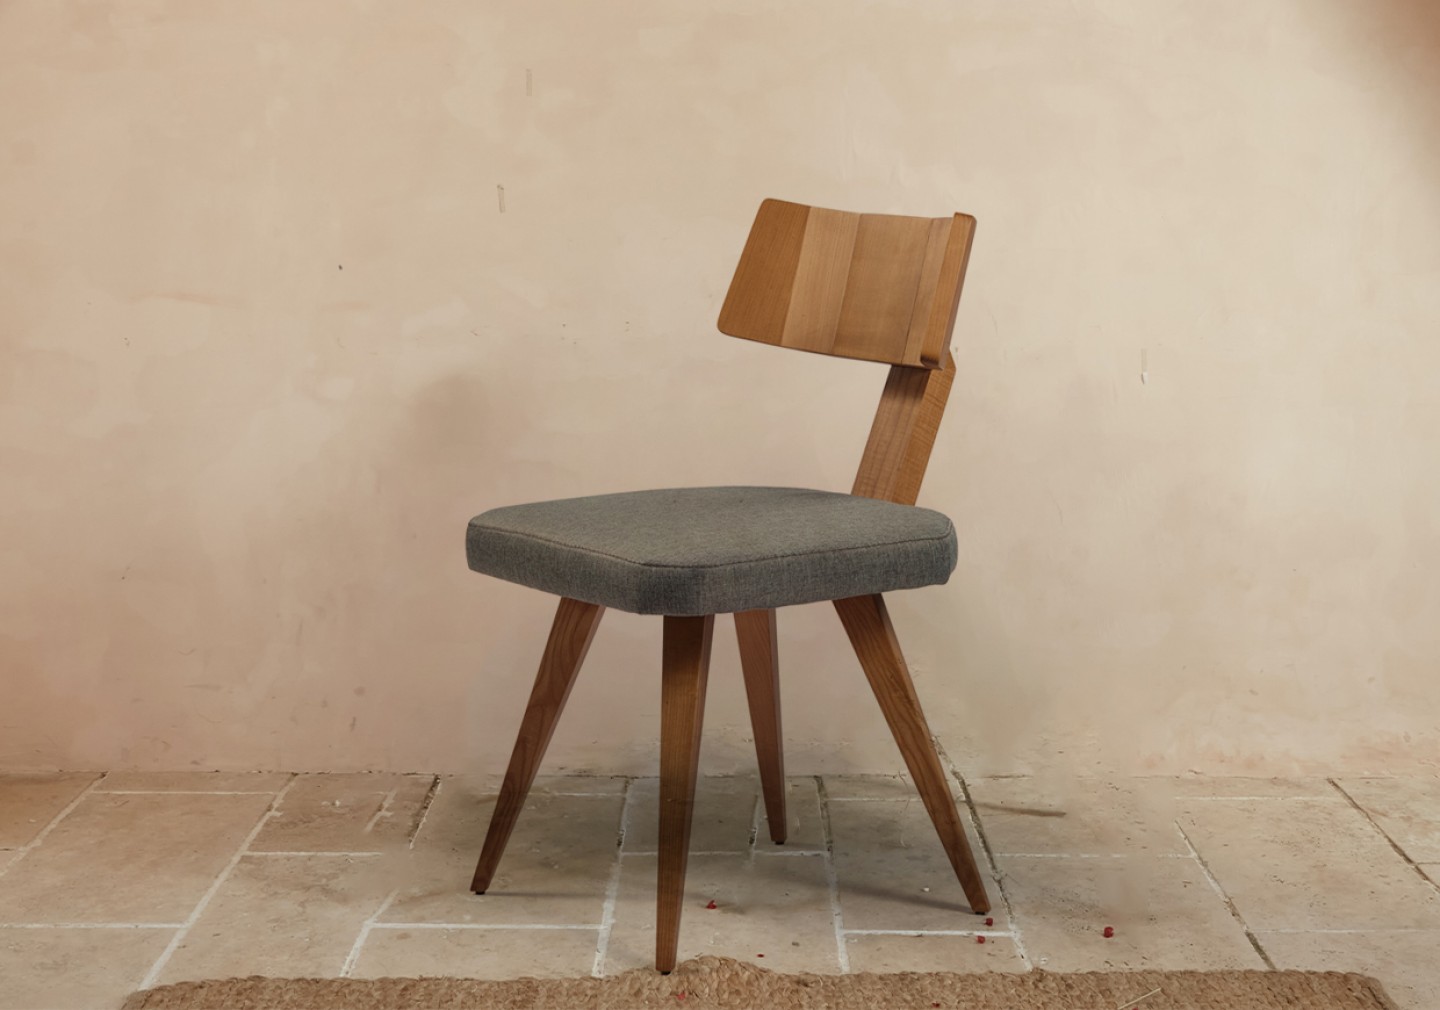 THE X MILAN DINING CHAIR